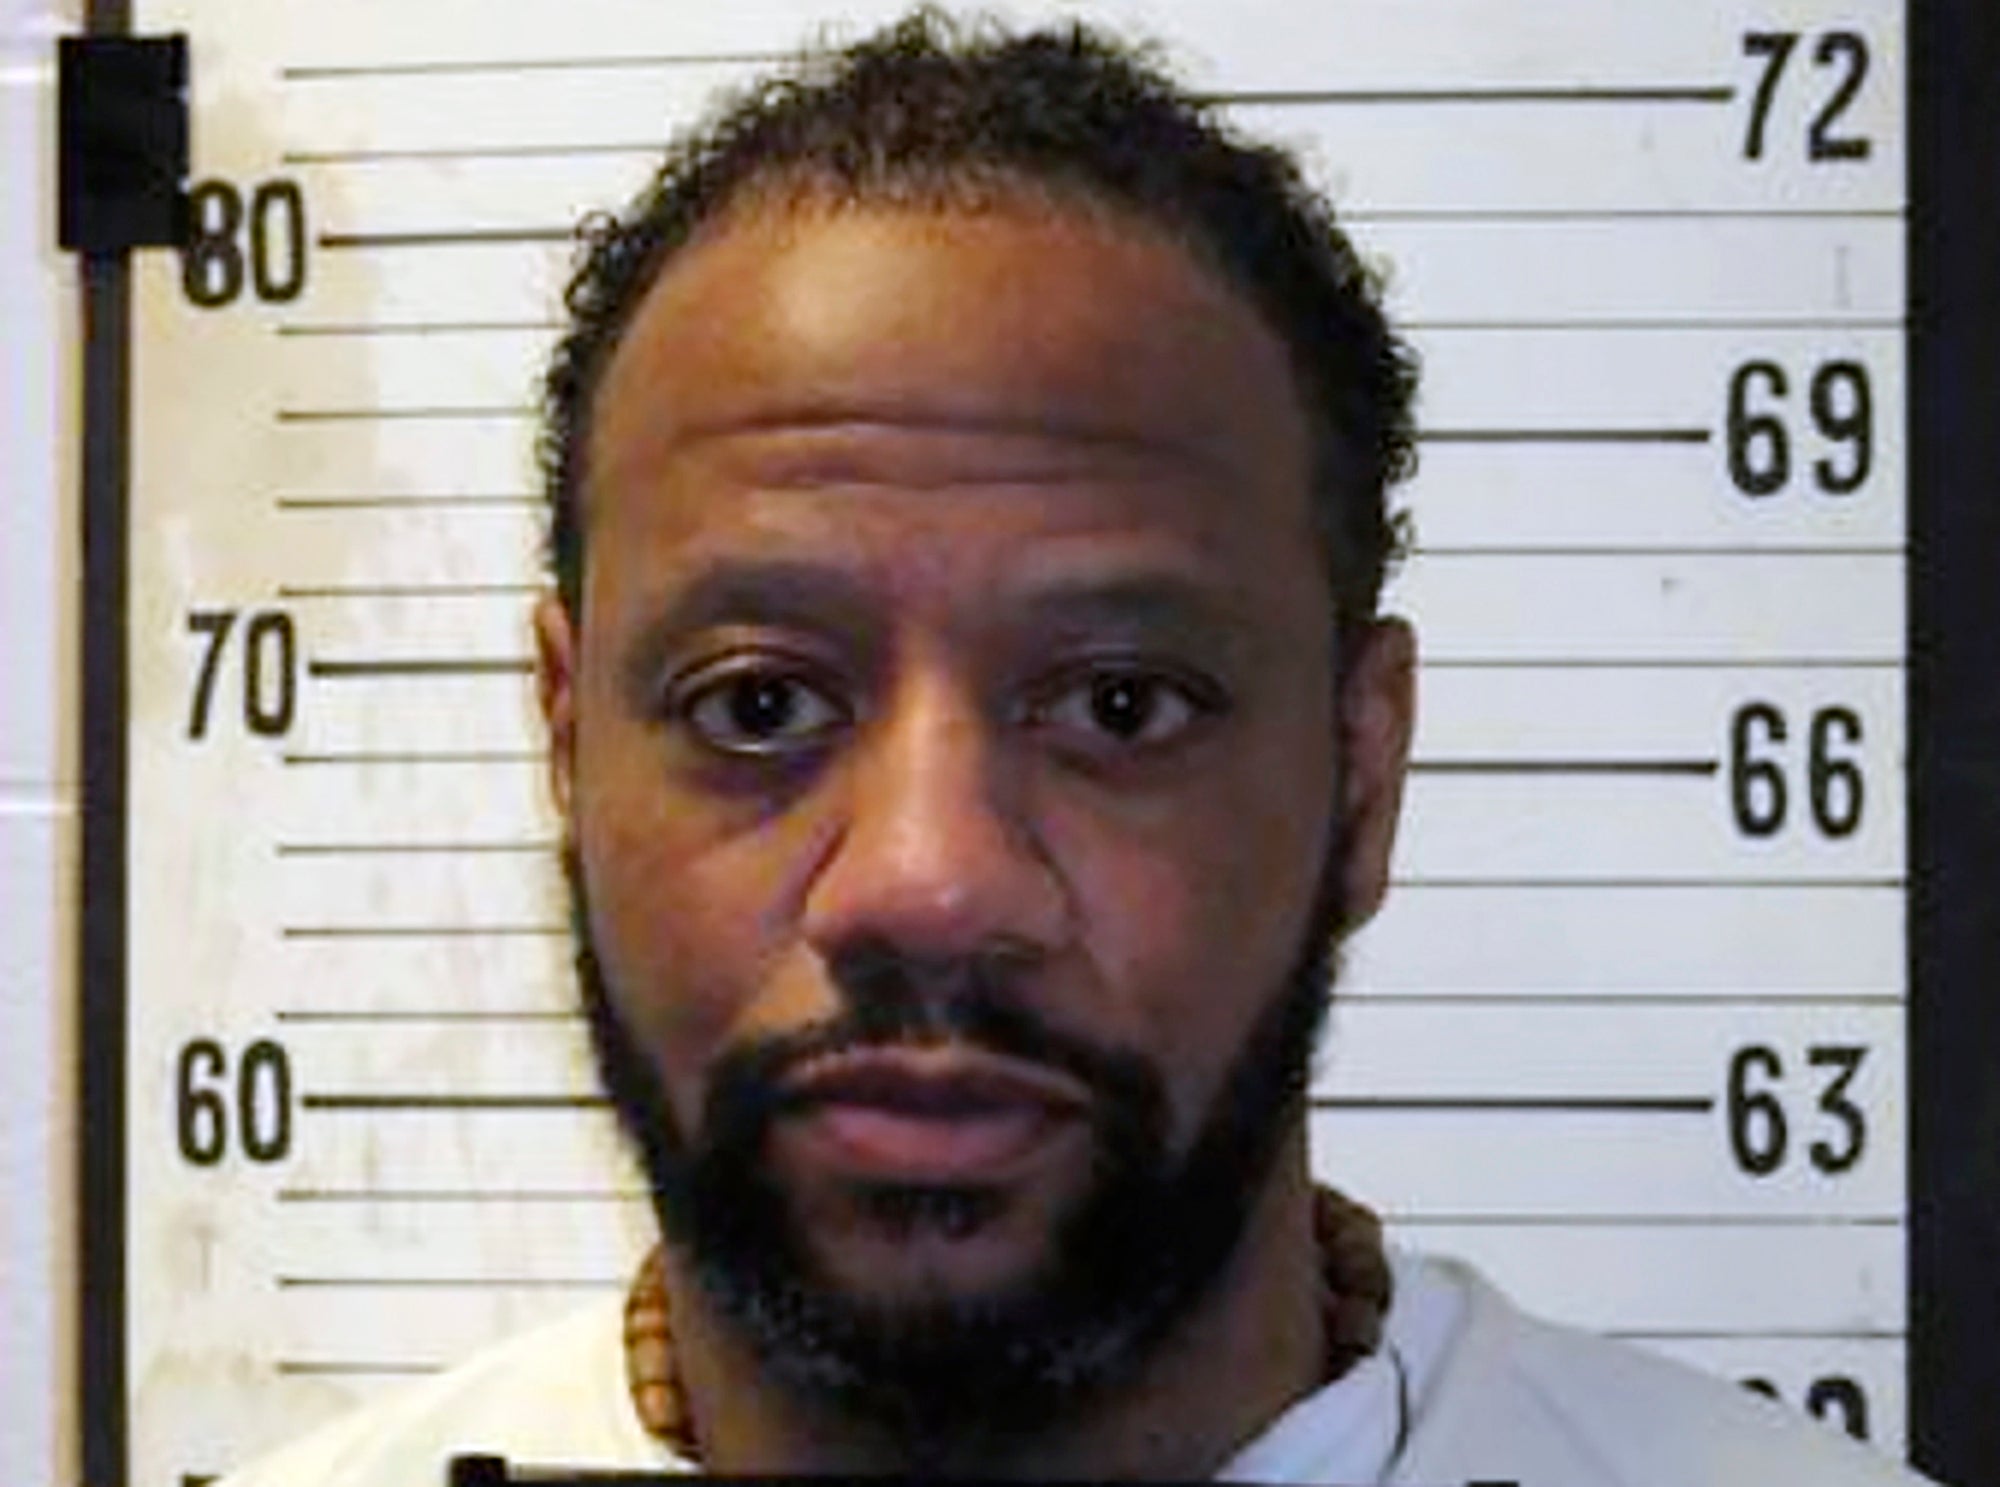 Pervis Payne is set to be executed on April 9, 2021